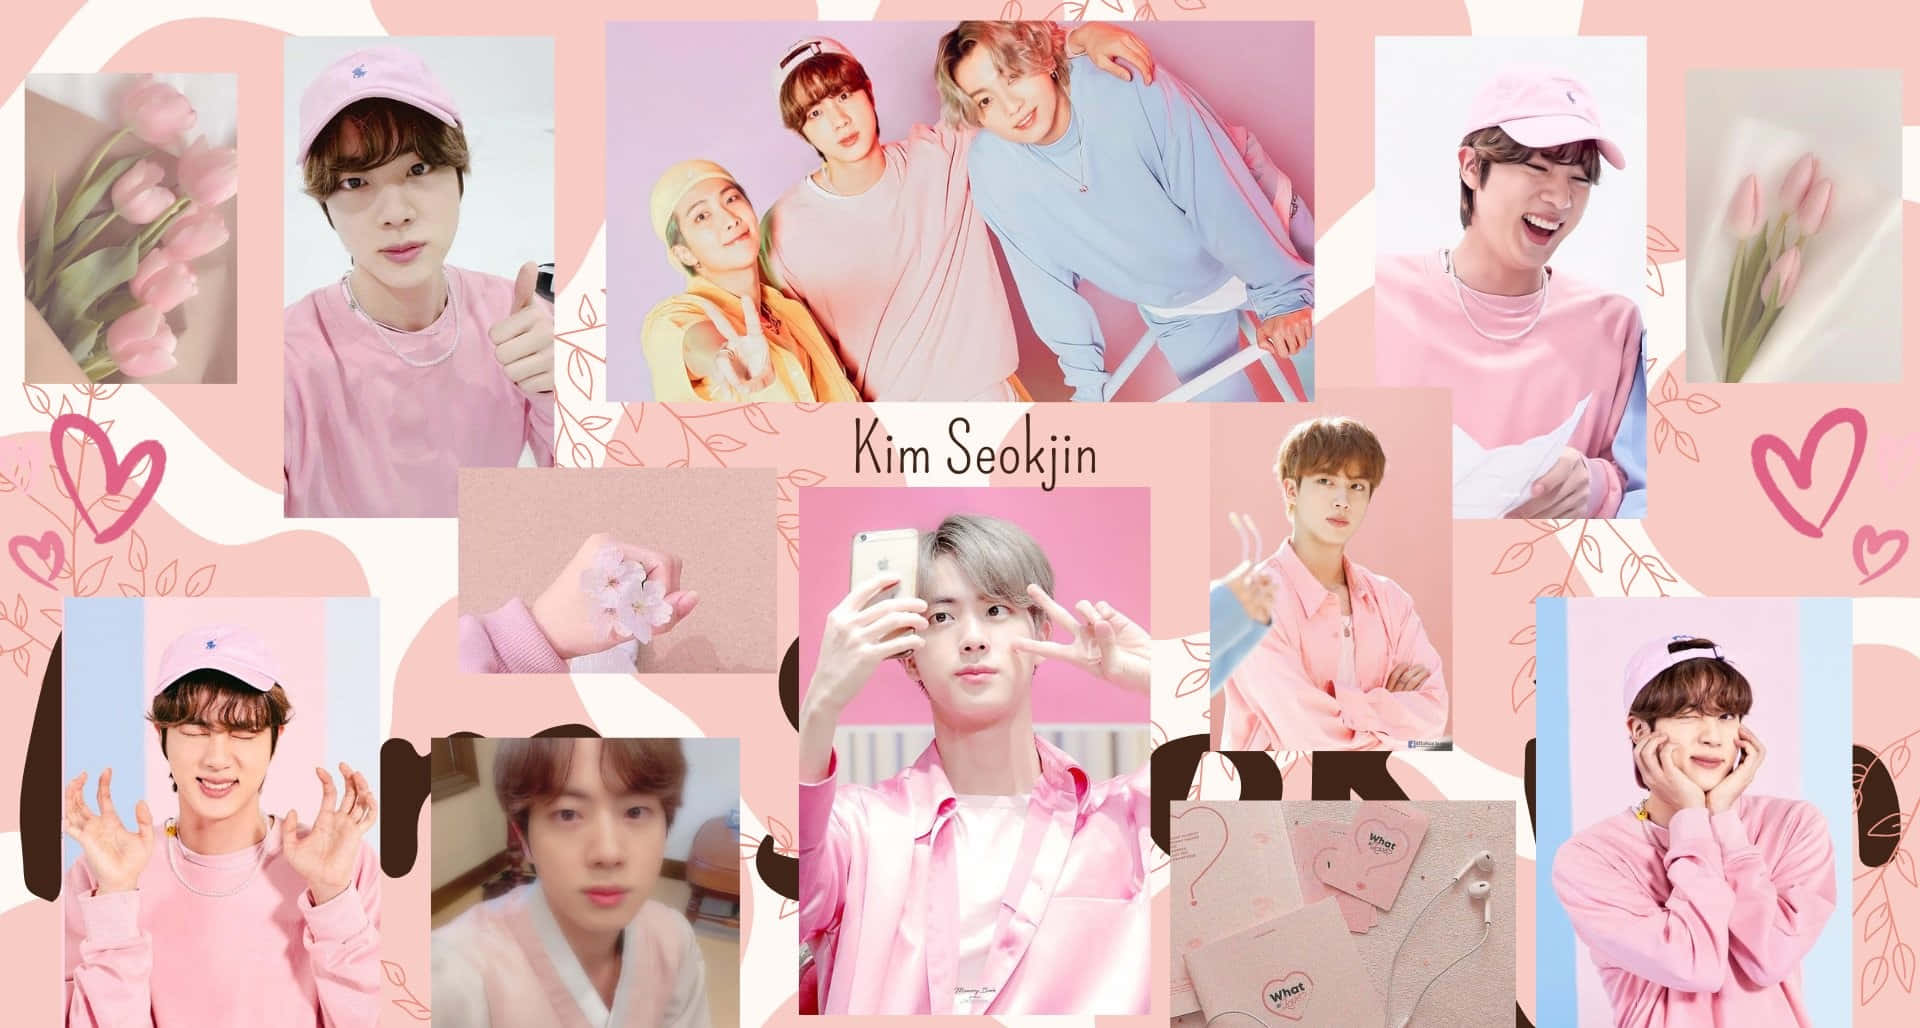 A Collage Of Pictures Of Bts Members In Pink